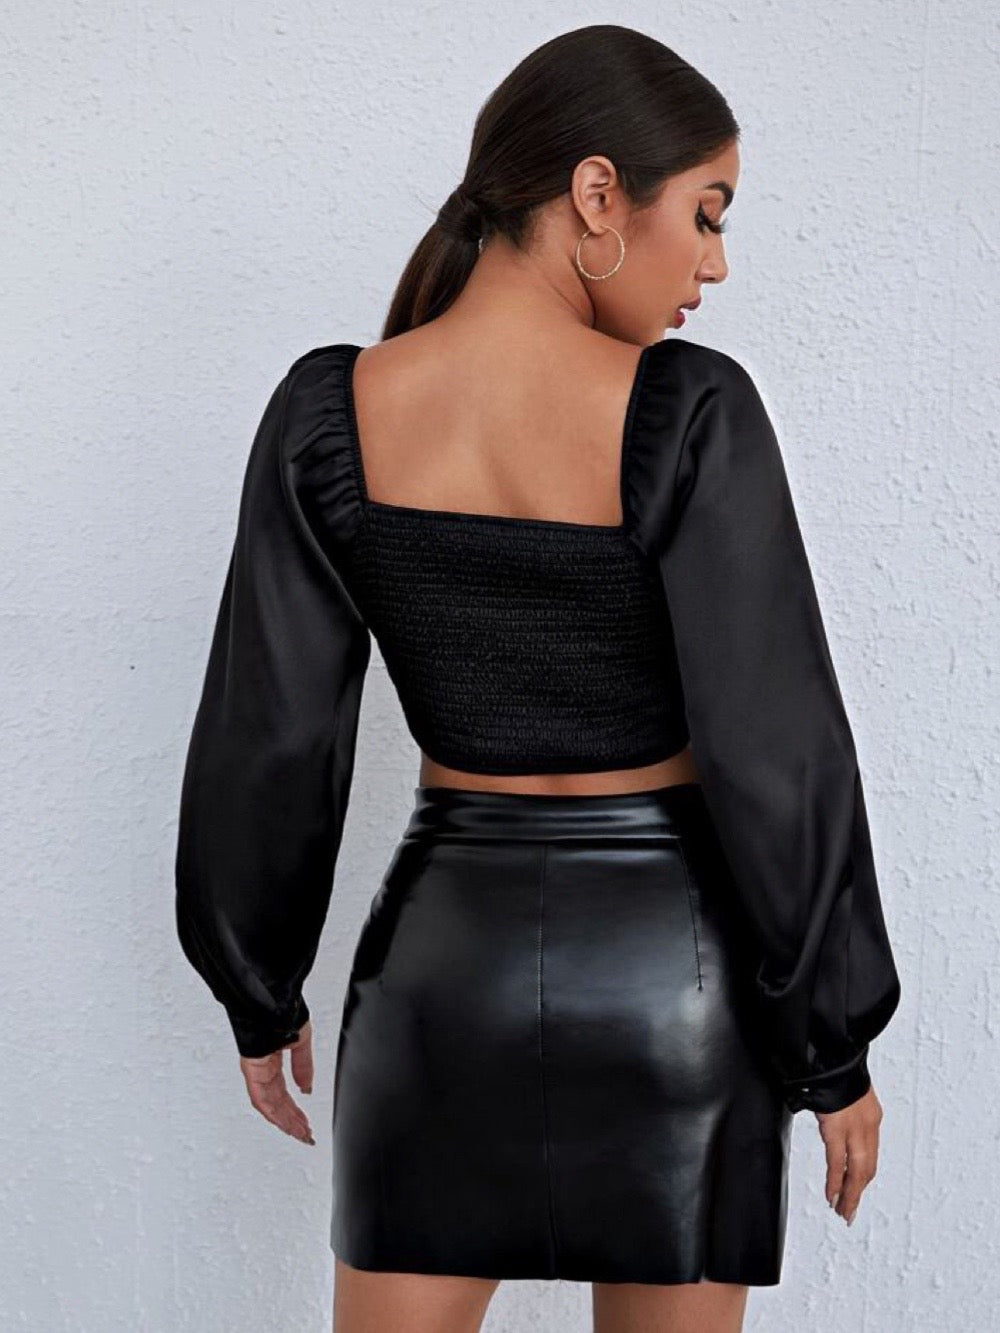 Women's Ruched Shirred Lantern Long Sleeve Square Neck Blouse Crop Satin Top Black Small - Legacy Boutiques